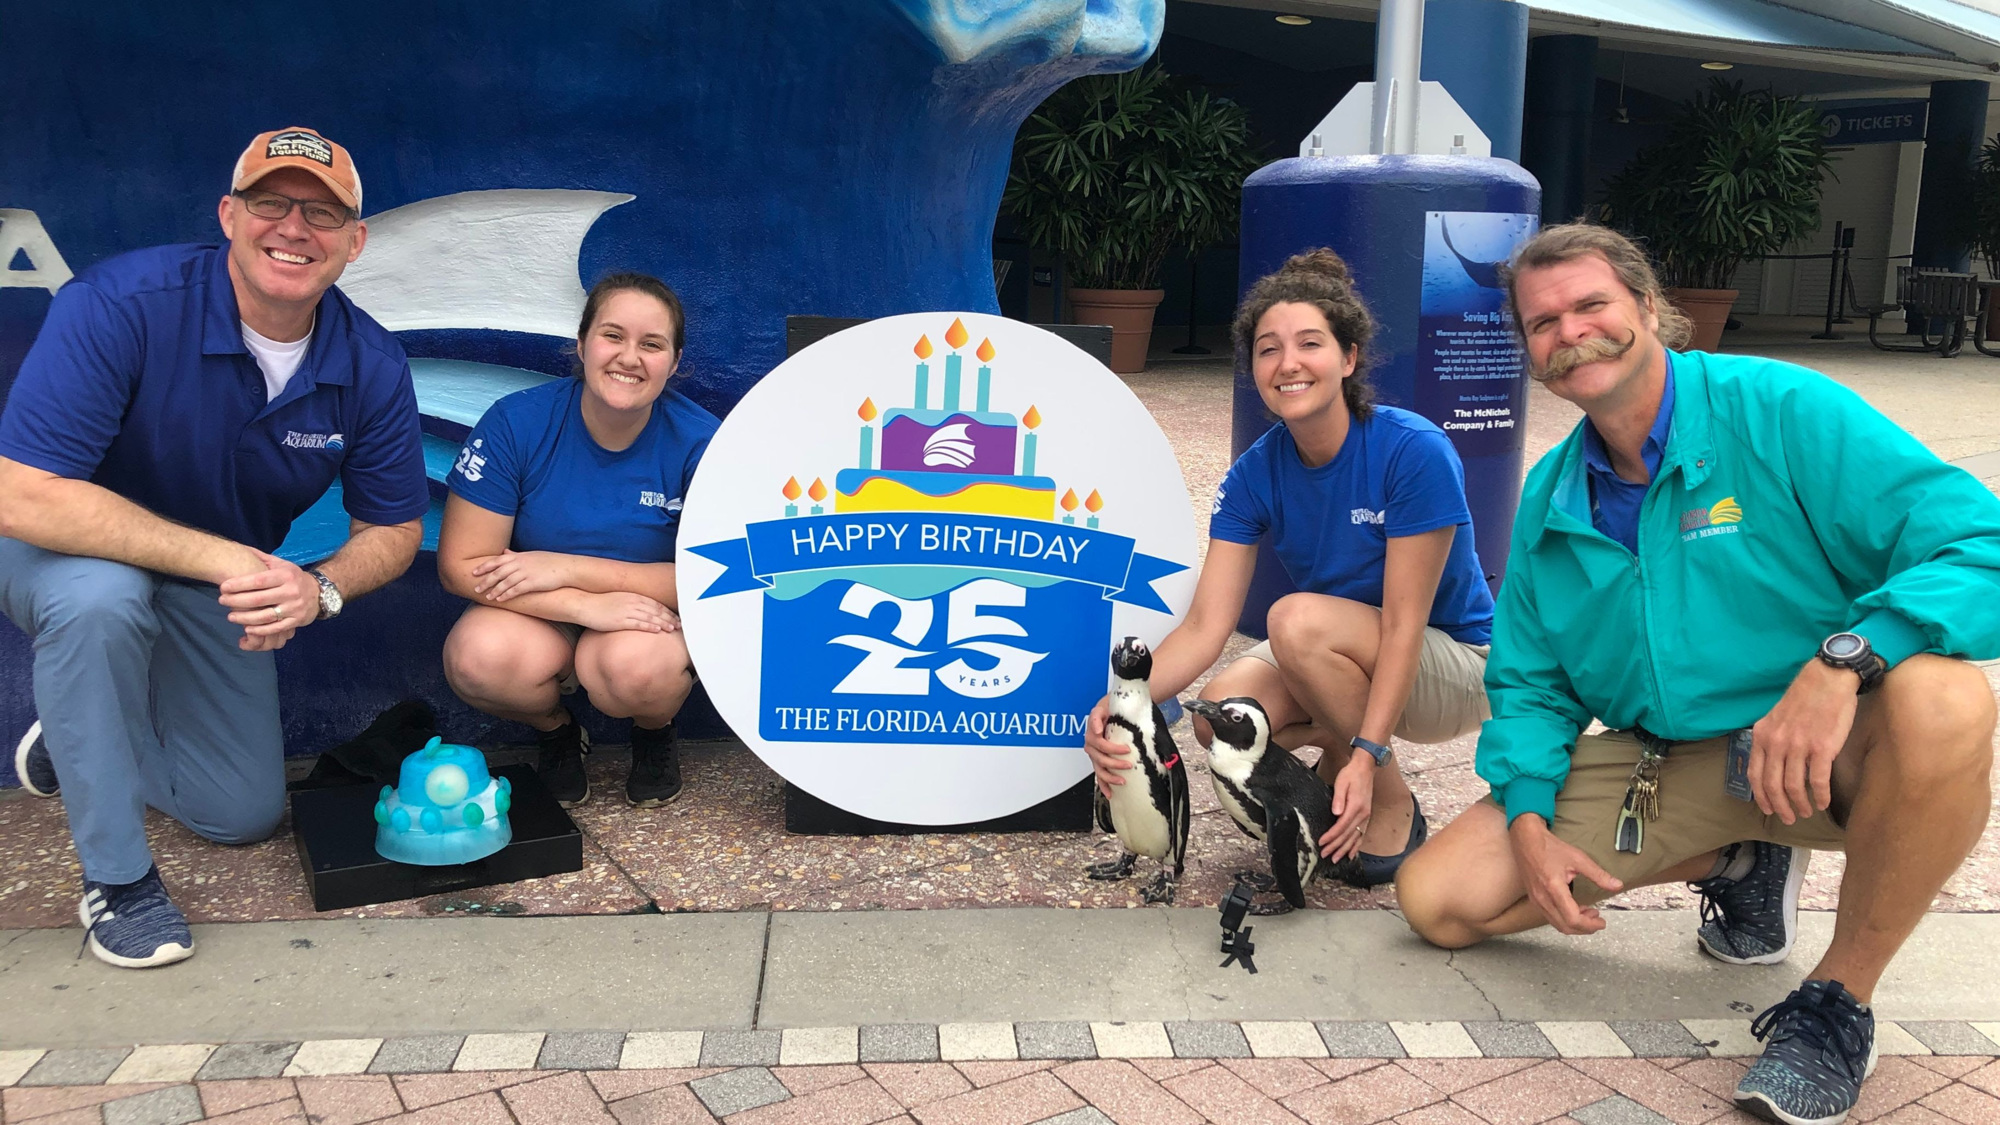 The Florida Aquarium's 25th anniversary celebration was a muted affair, with just a few staff members and animals in attendance. Courtesy photo.